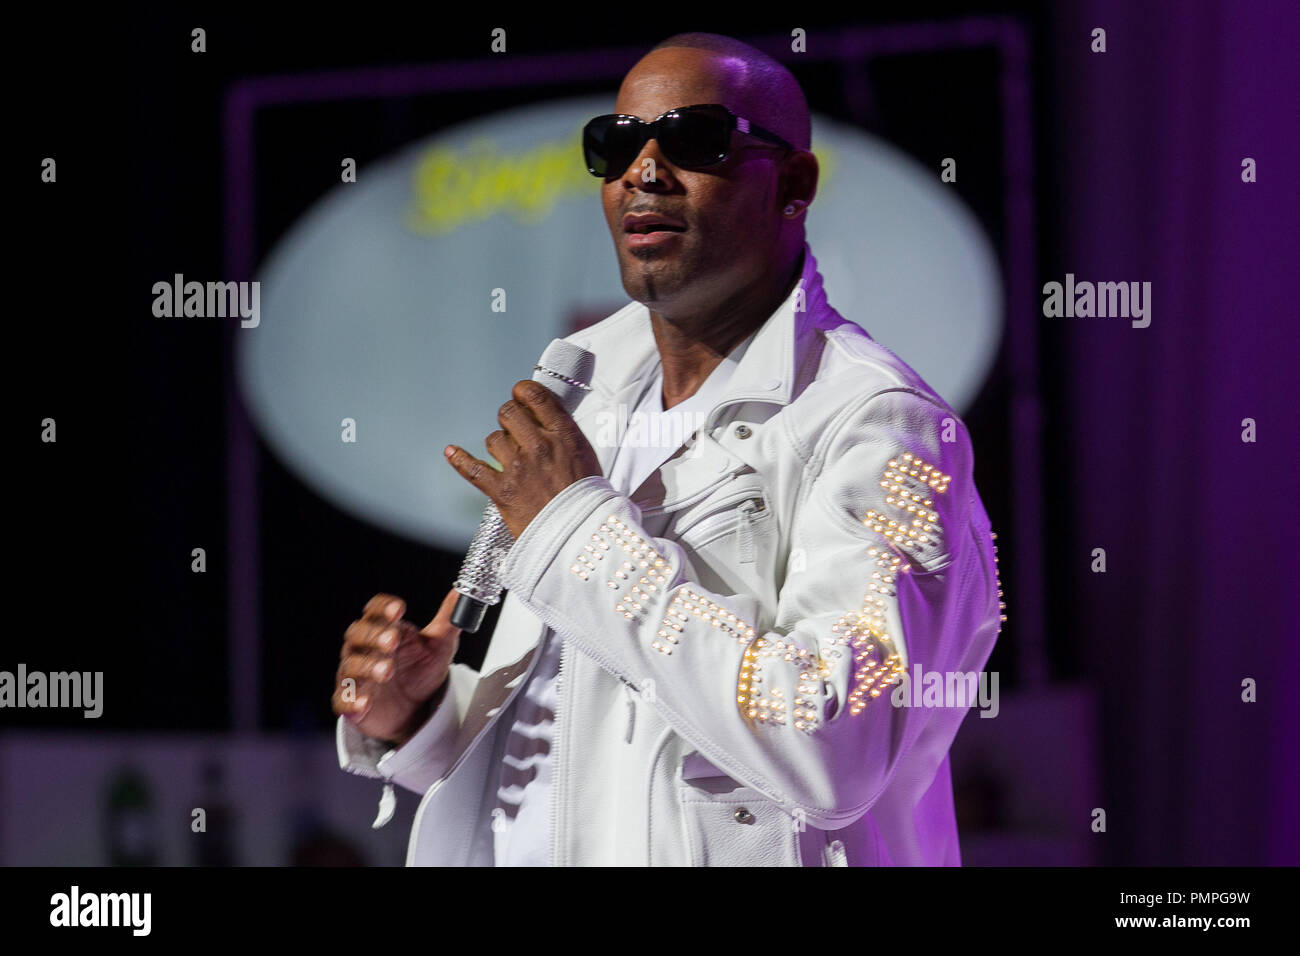 R Kelly performs during his 'Single Ladies' tour at Nokia Theatre L.A. LIVE on November 2, 2012 in Los Angeles. CA. Photo by Eden Ari / PRPP / PictureLux  File Reference # 31687 022PRPPEA  For Editorial Use Only -  All Rights Reserved Stock Photo